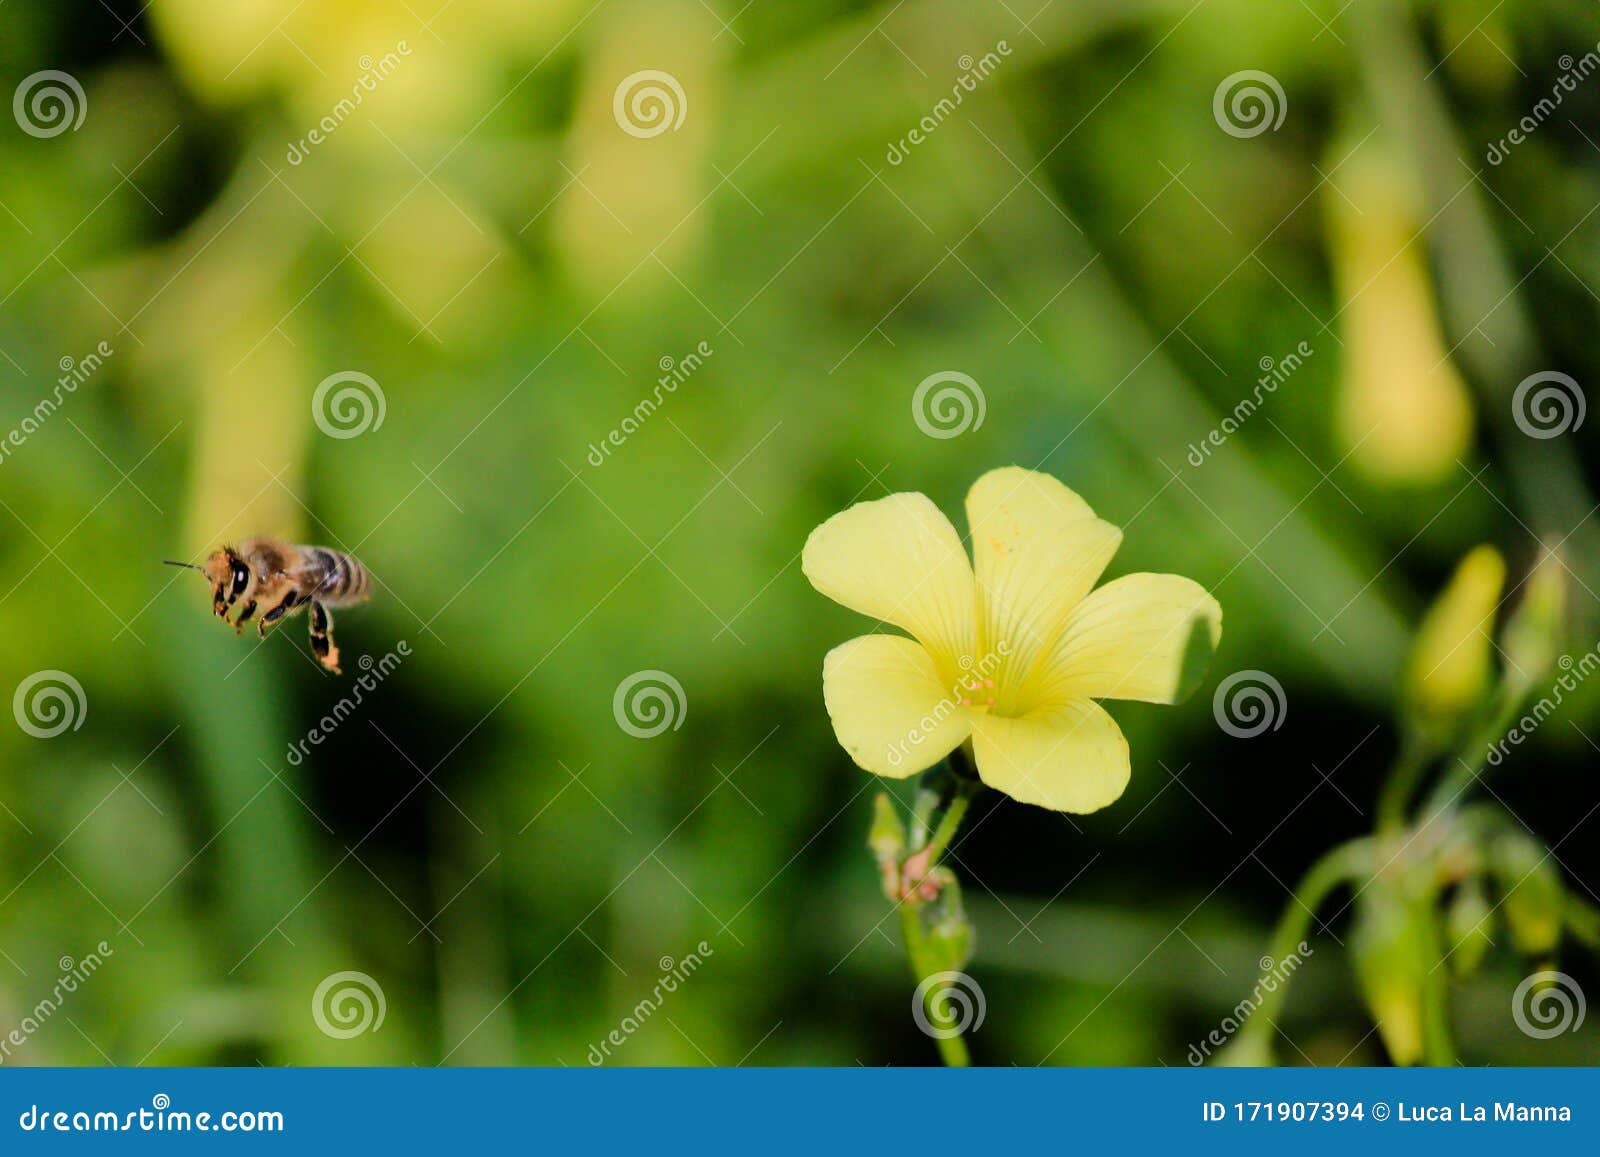 flying bee after sucking nectar